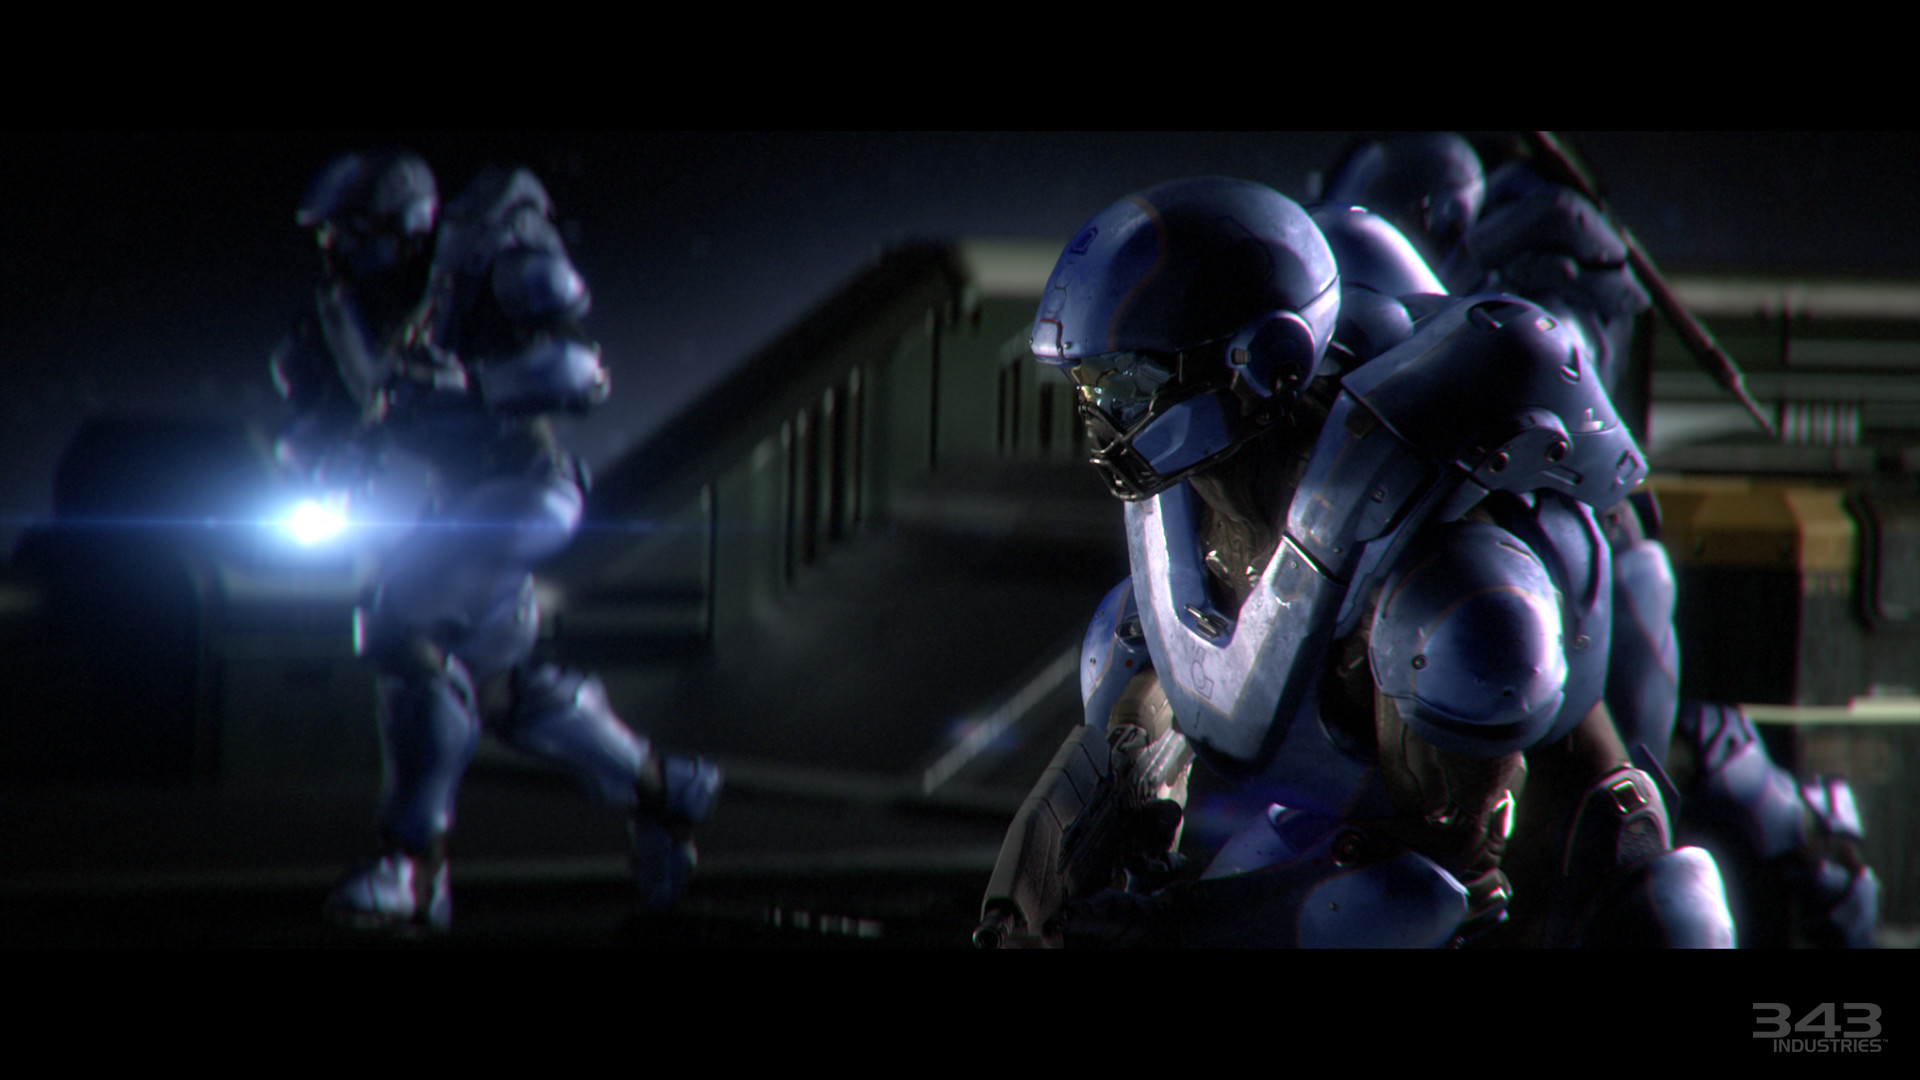 1920x1080 Training armour - Clearly has Halo 4 design elements, though leans a little  more towards the other styles